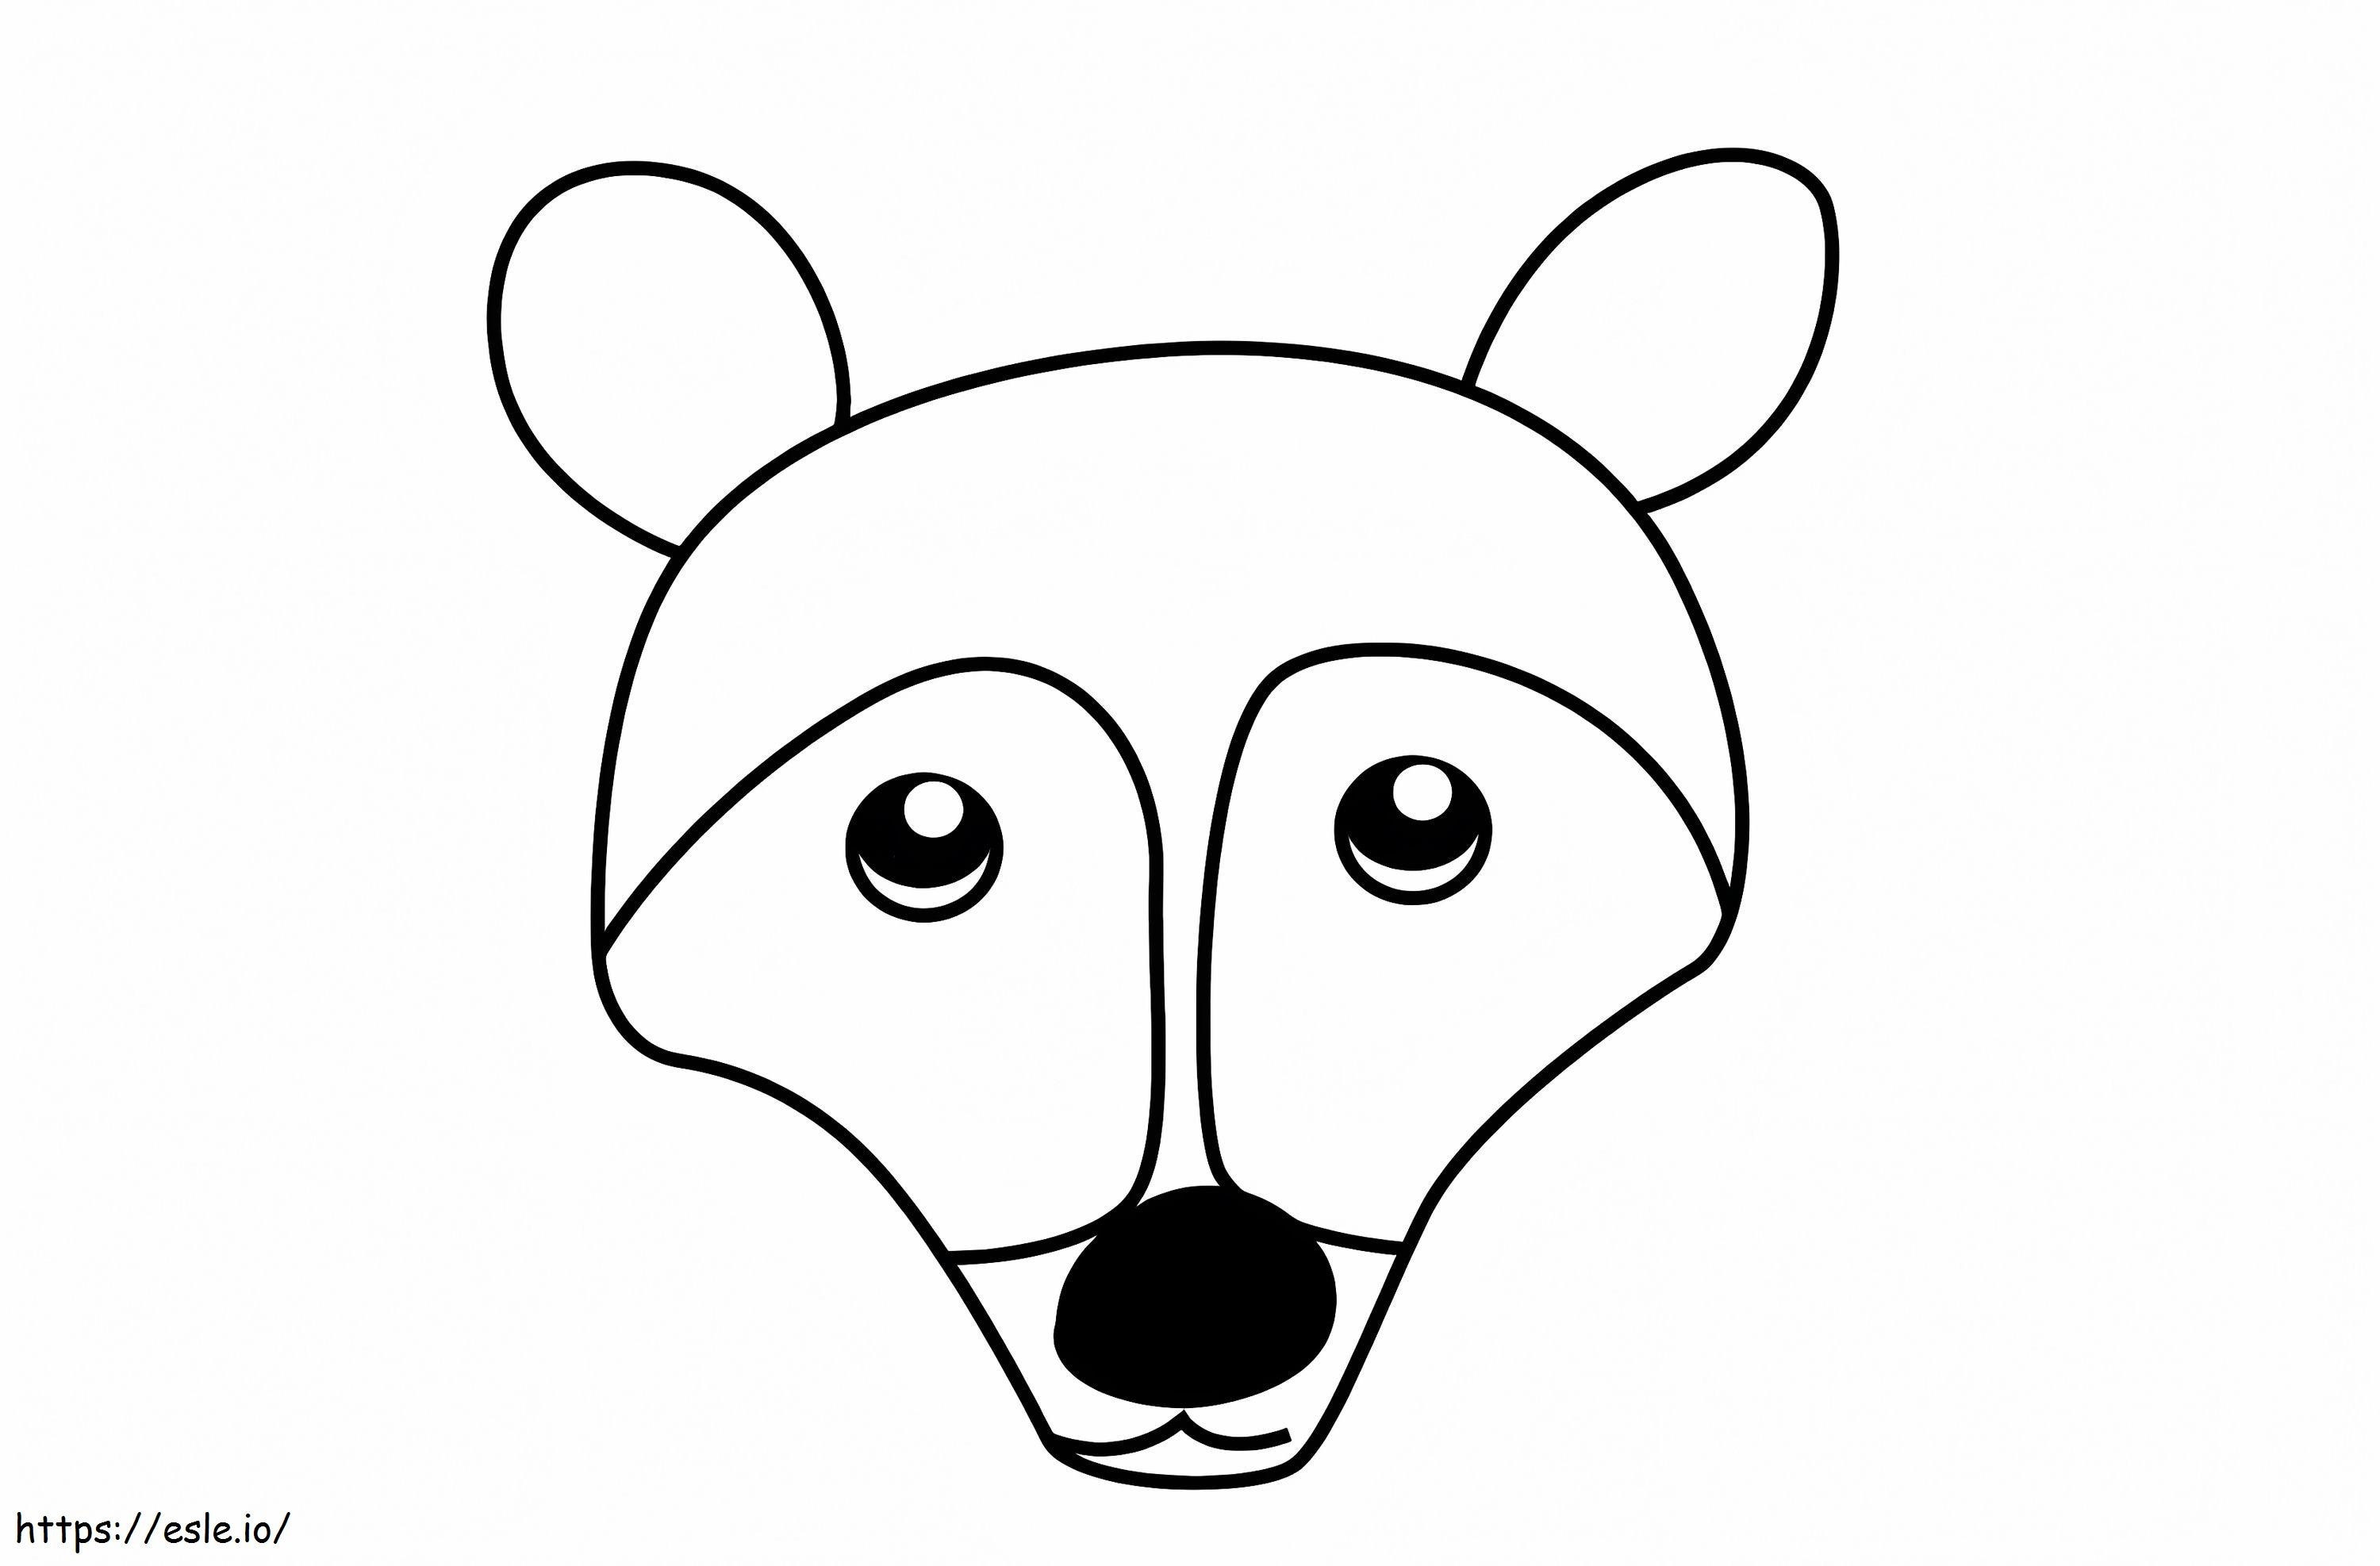 Coat Face coloring page